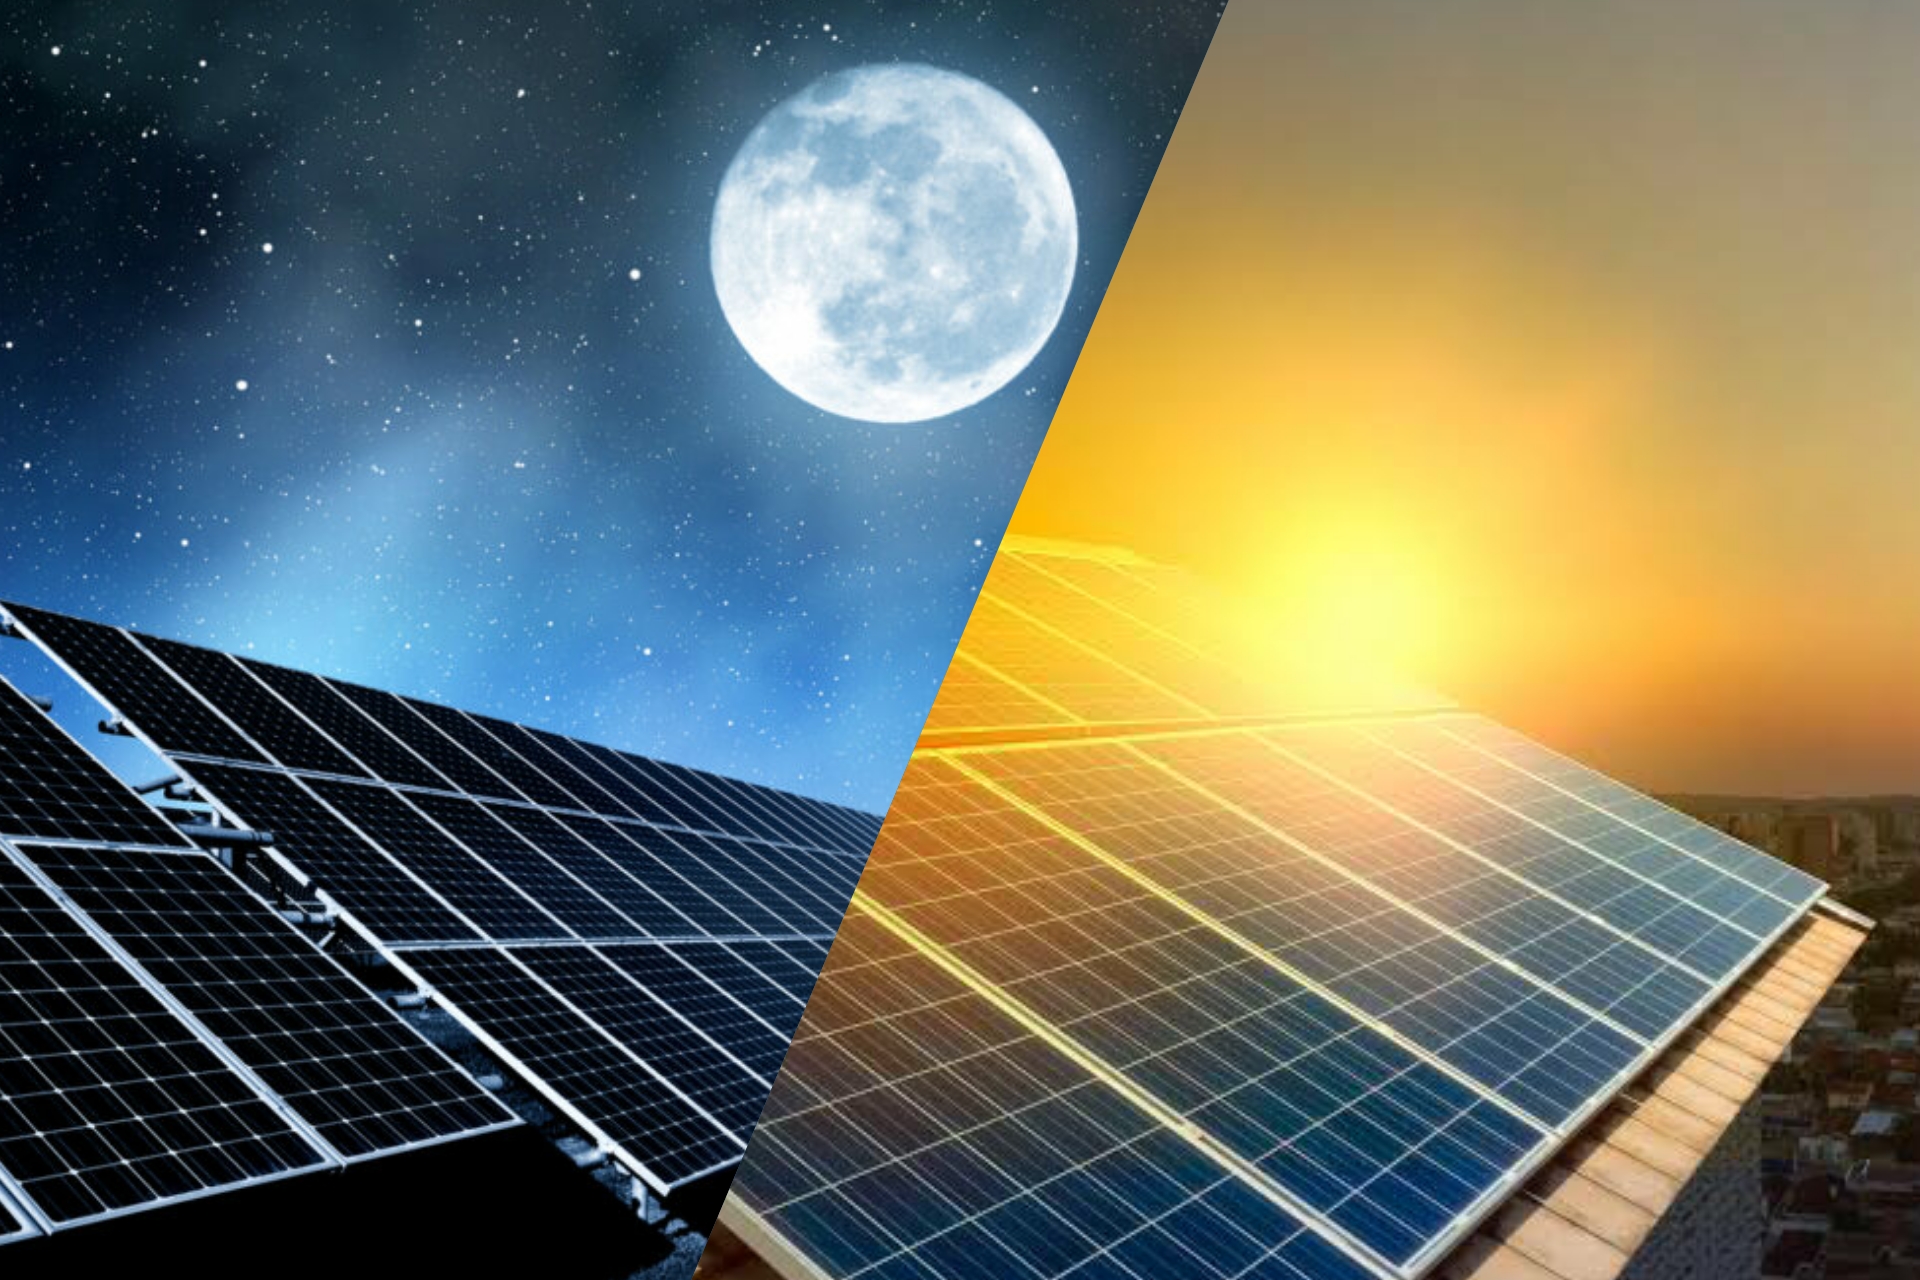 generate-solar-power-at-night-off-grid-lifestyle-expo